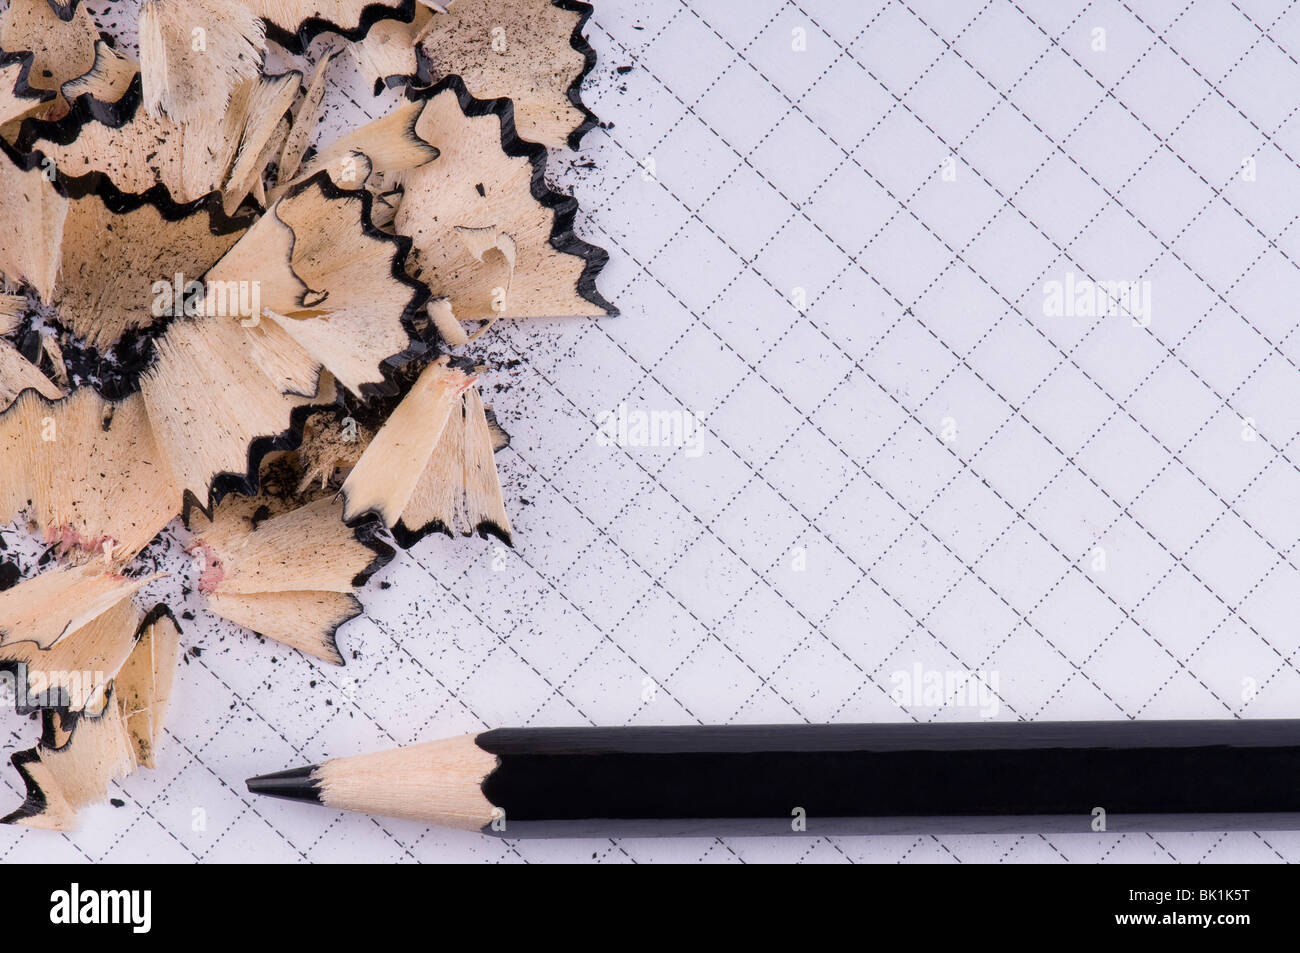 The black pencil and wood shavings background Stock Photo